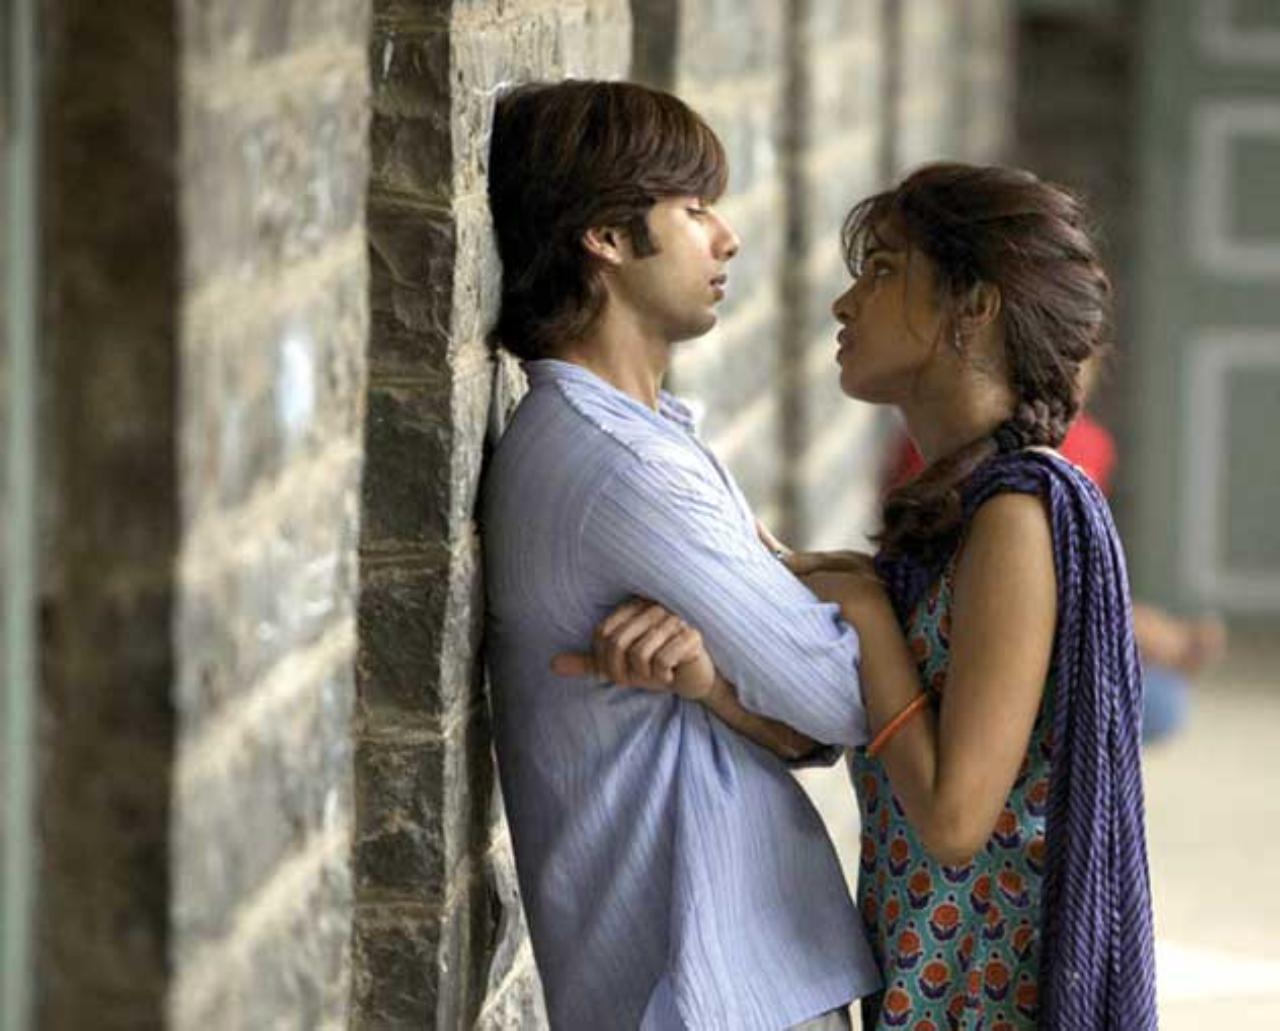 With a rating of 7.4, Priyanka Chopra and Shahid Kapoor's 2009 film is the third highest-rated film of the actress